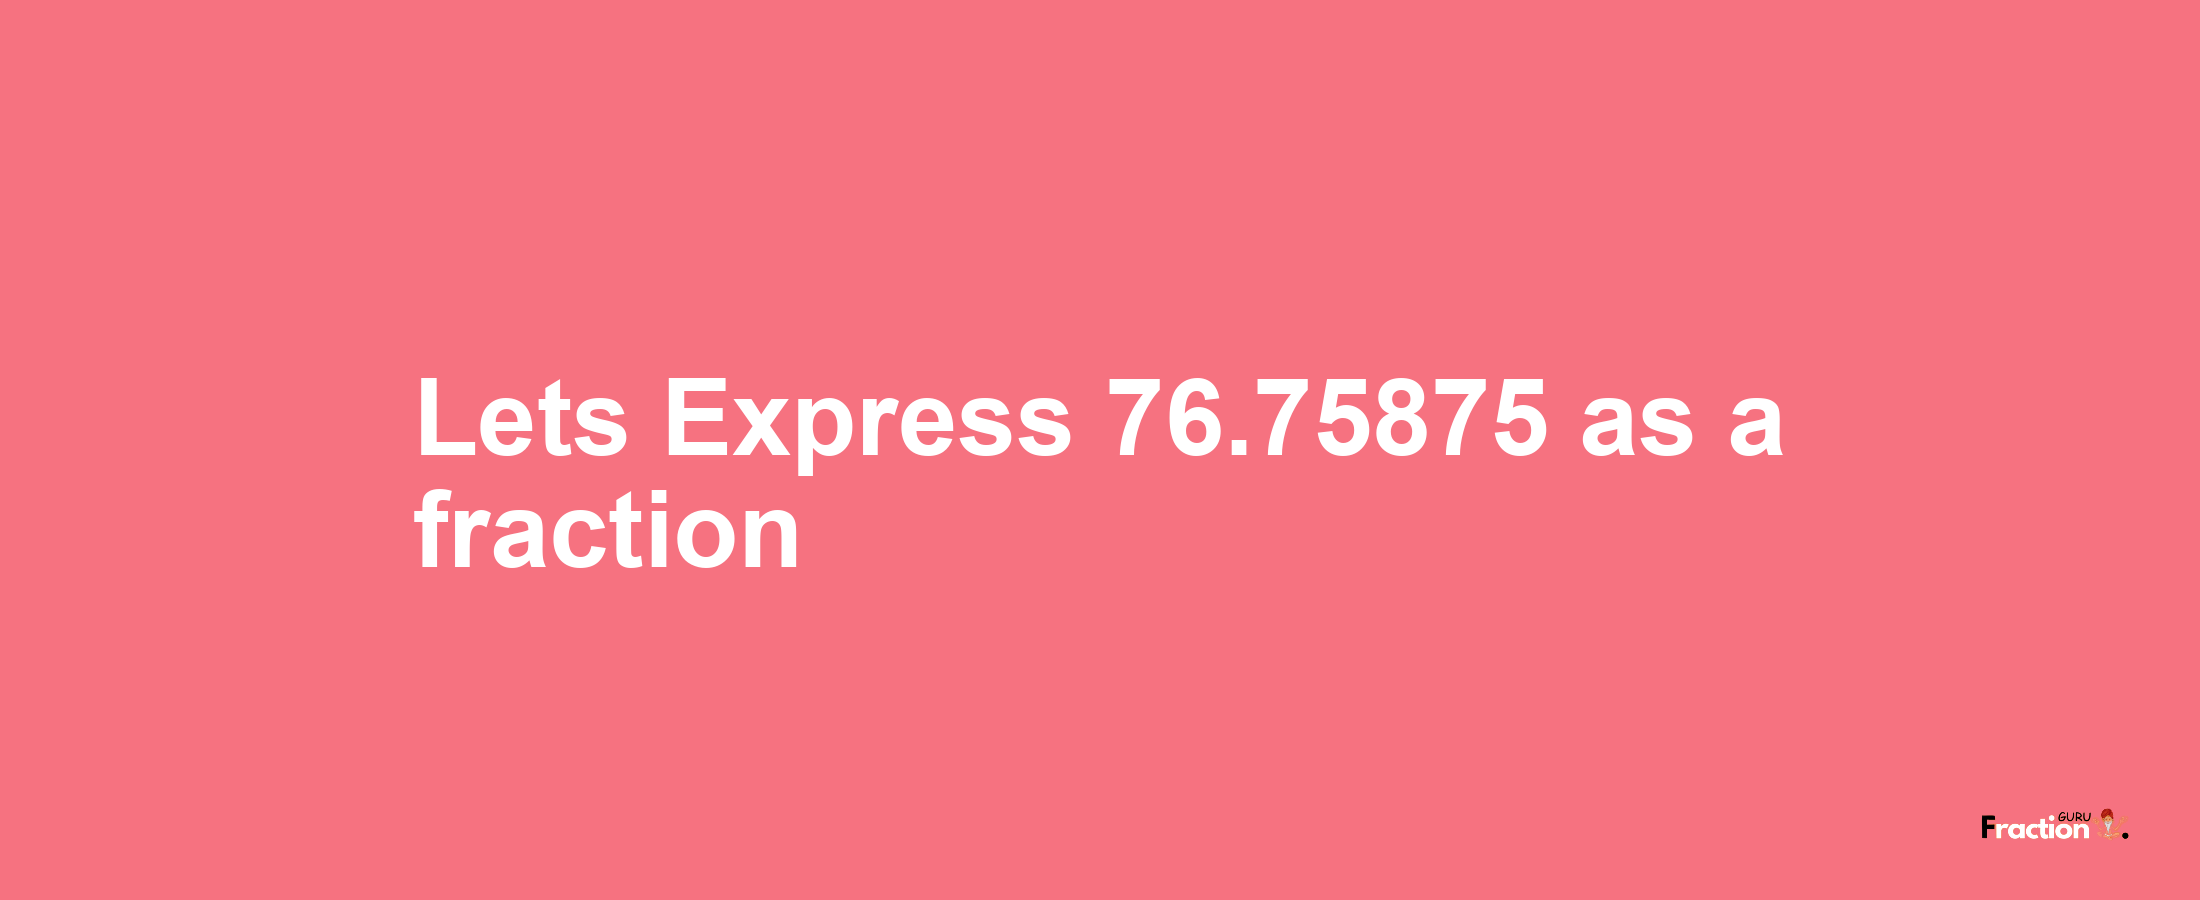 Lets Express 76.75875 as afraction